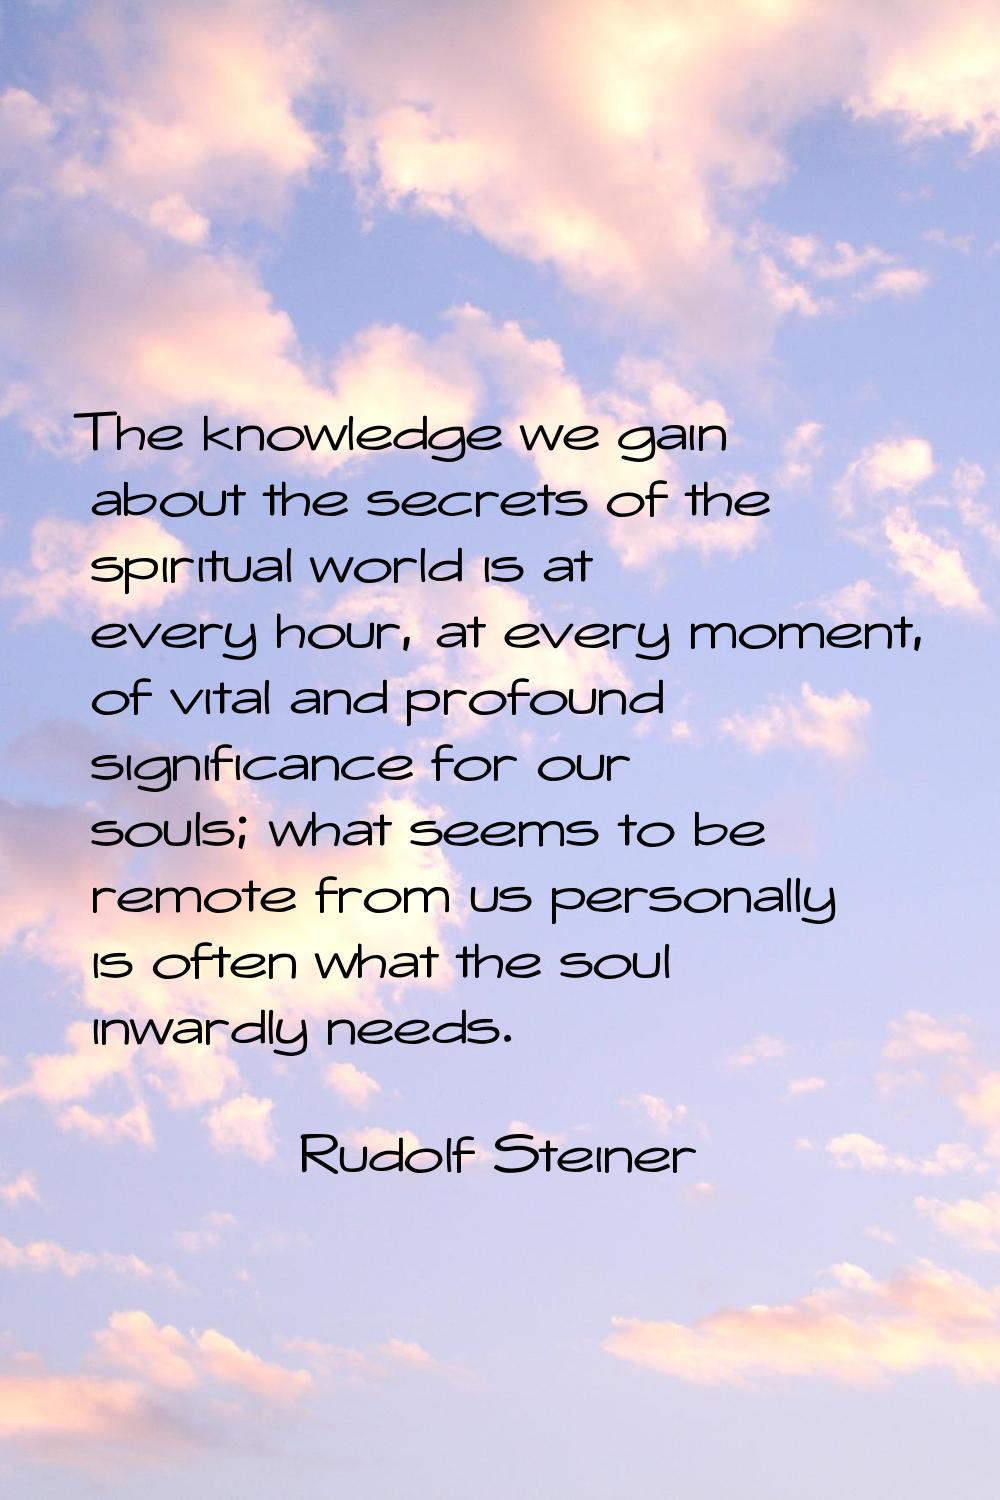 The knowledge we gain about the secrets of the spiritual world is at every hour, at every moment, o